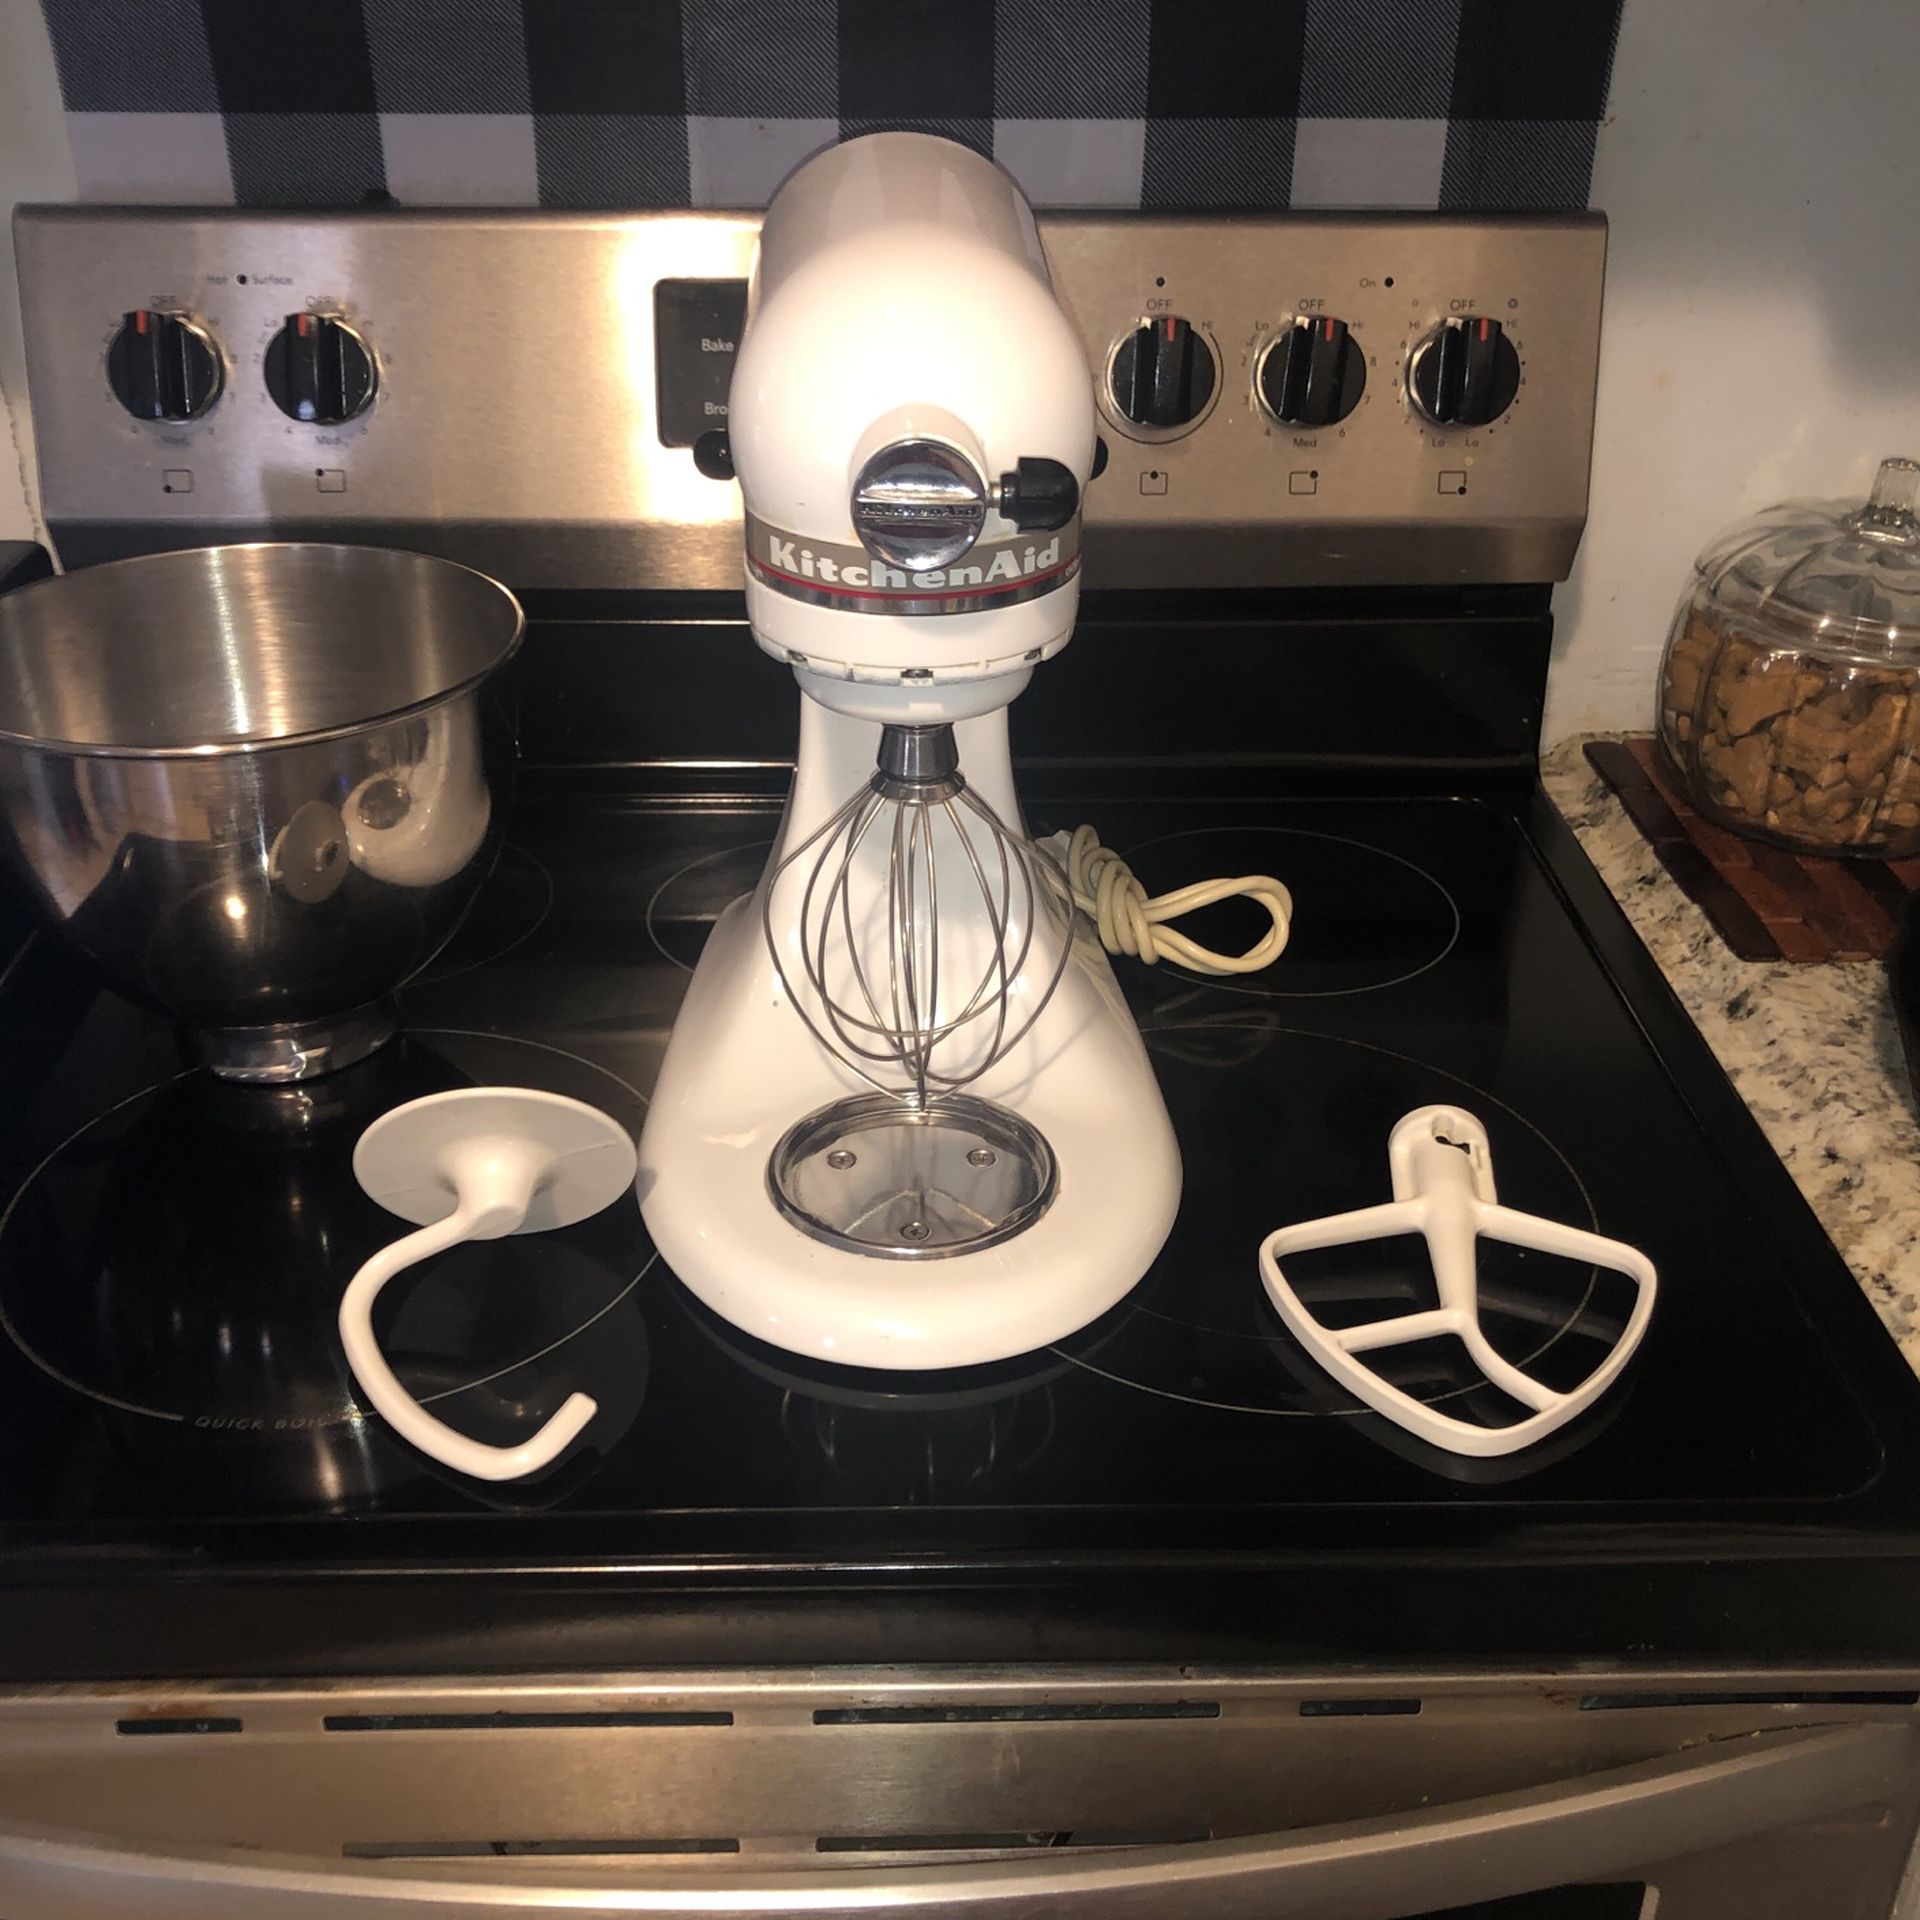 Kitchen Aid Mixer With Attachments  Model# KSM90